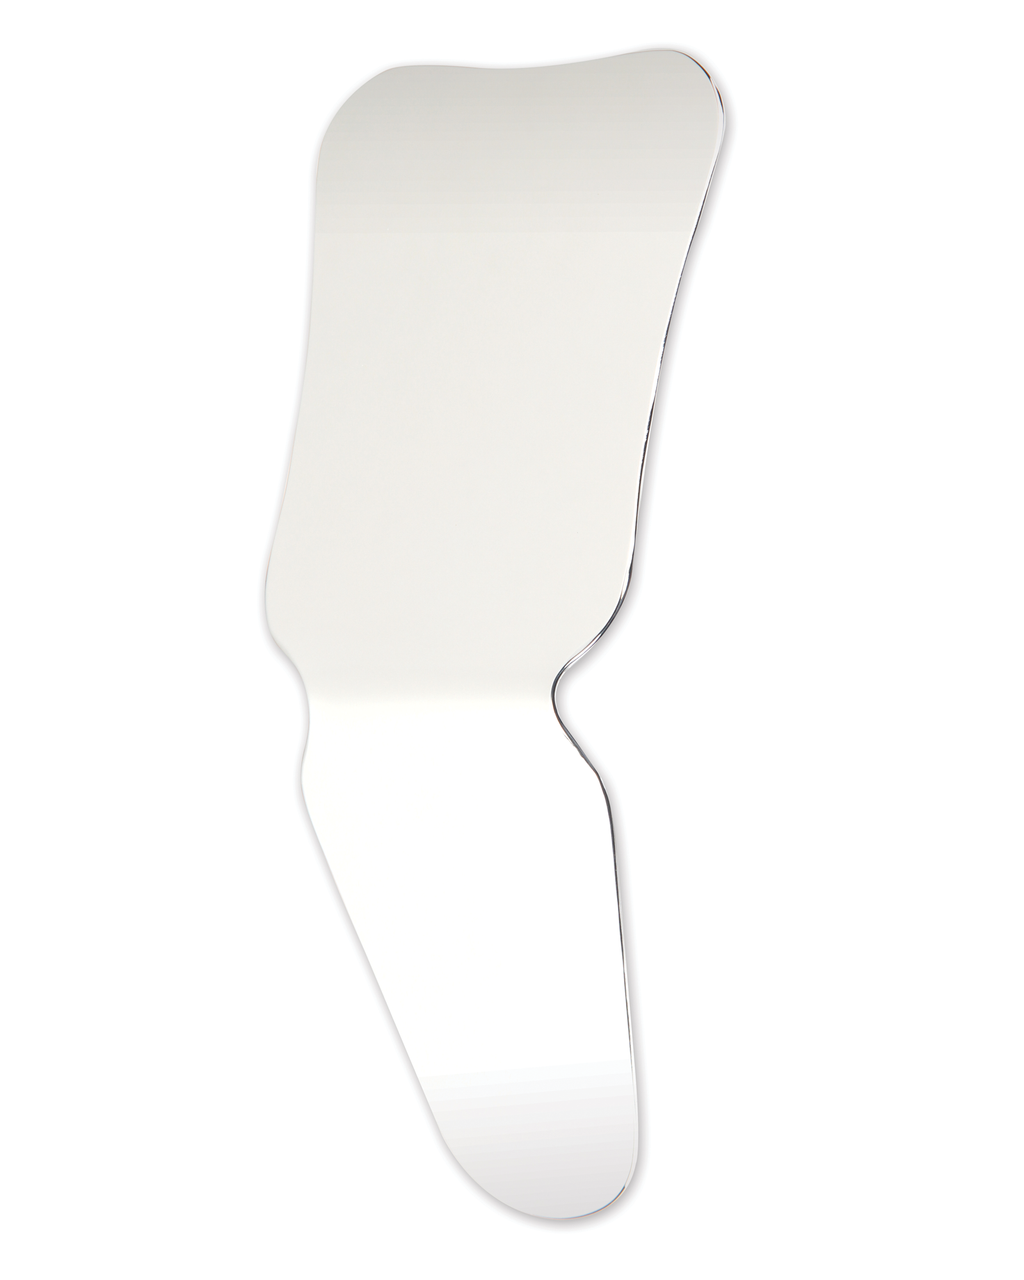 Angled Two-Sided Occlusal/Lingual Intraoral Mirror